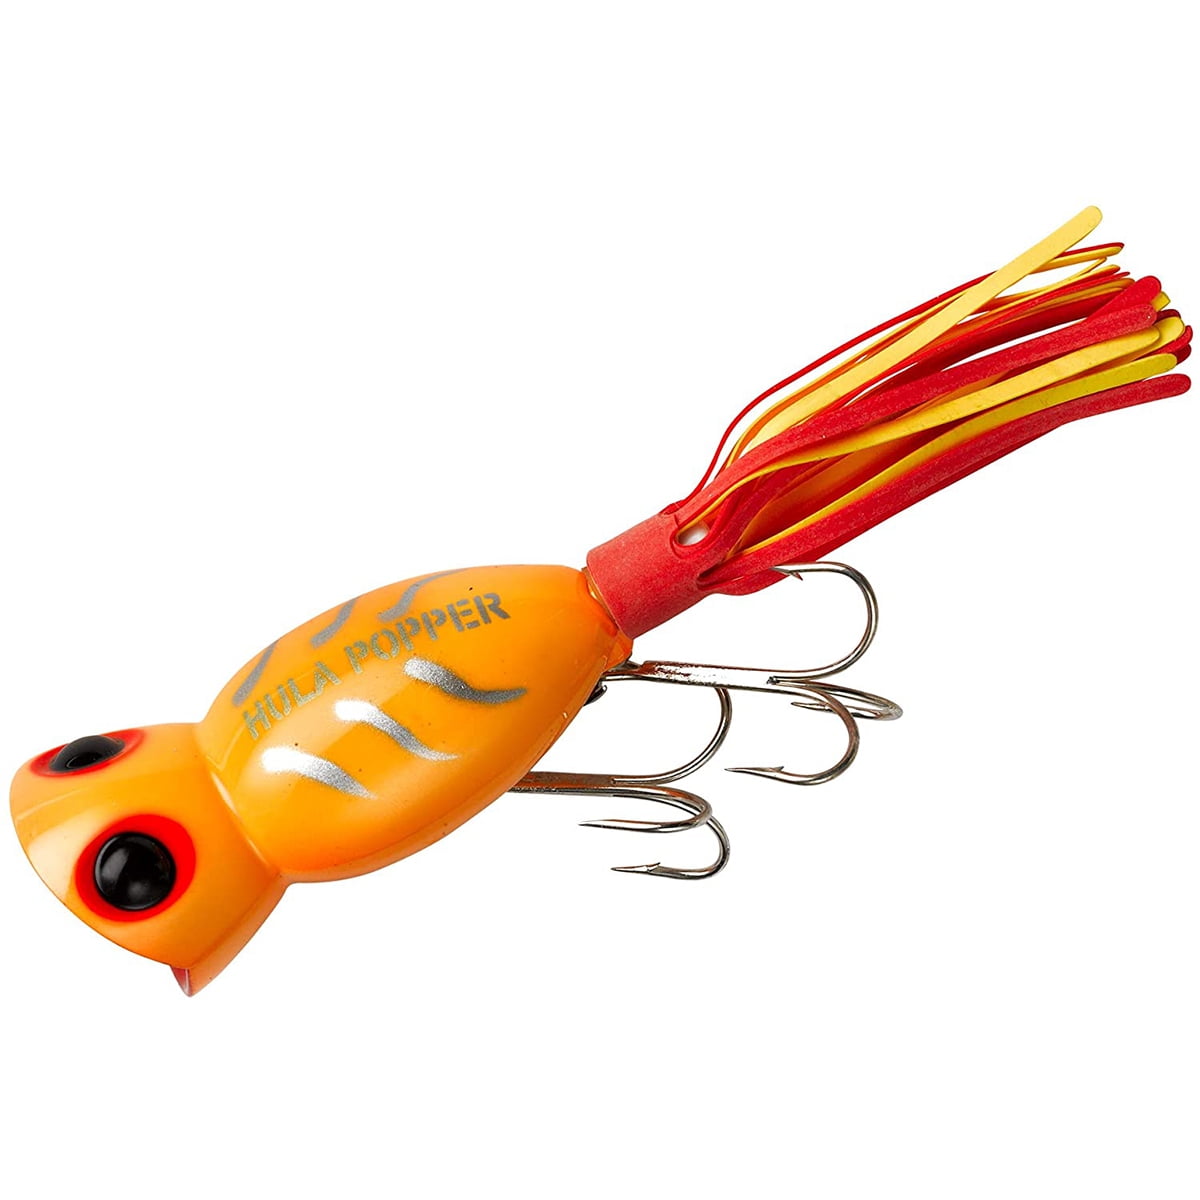 Arbogast Hula Popper 1/4 oz Fishing Lure - White/Red Head 